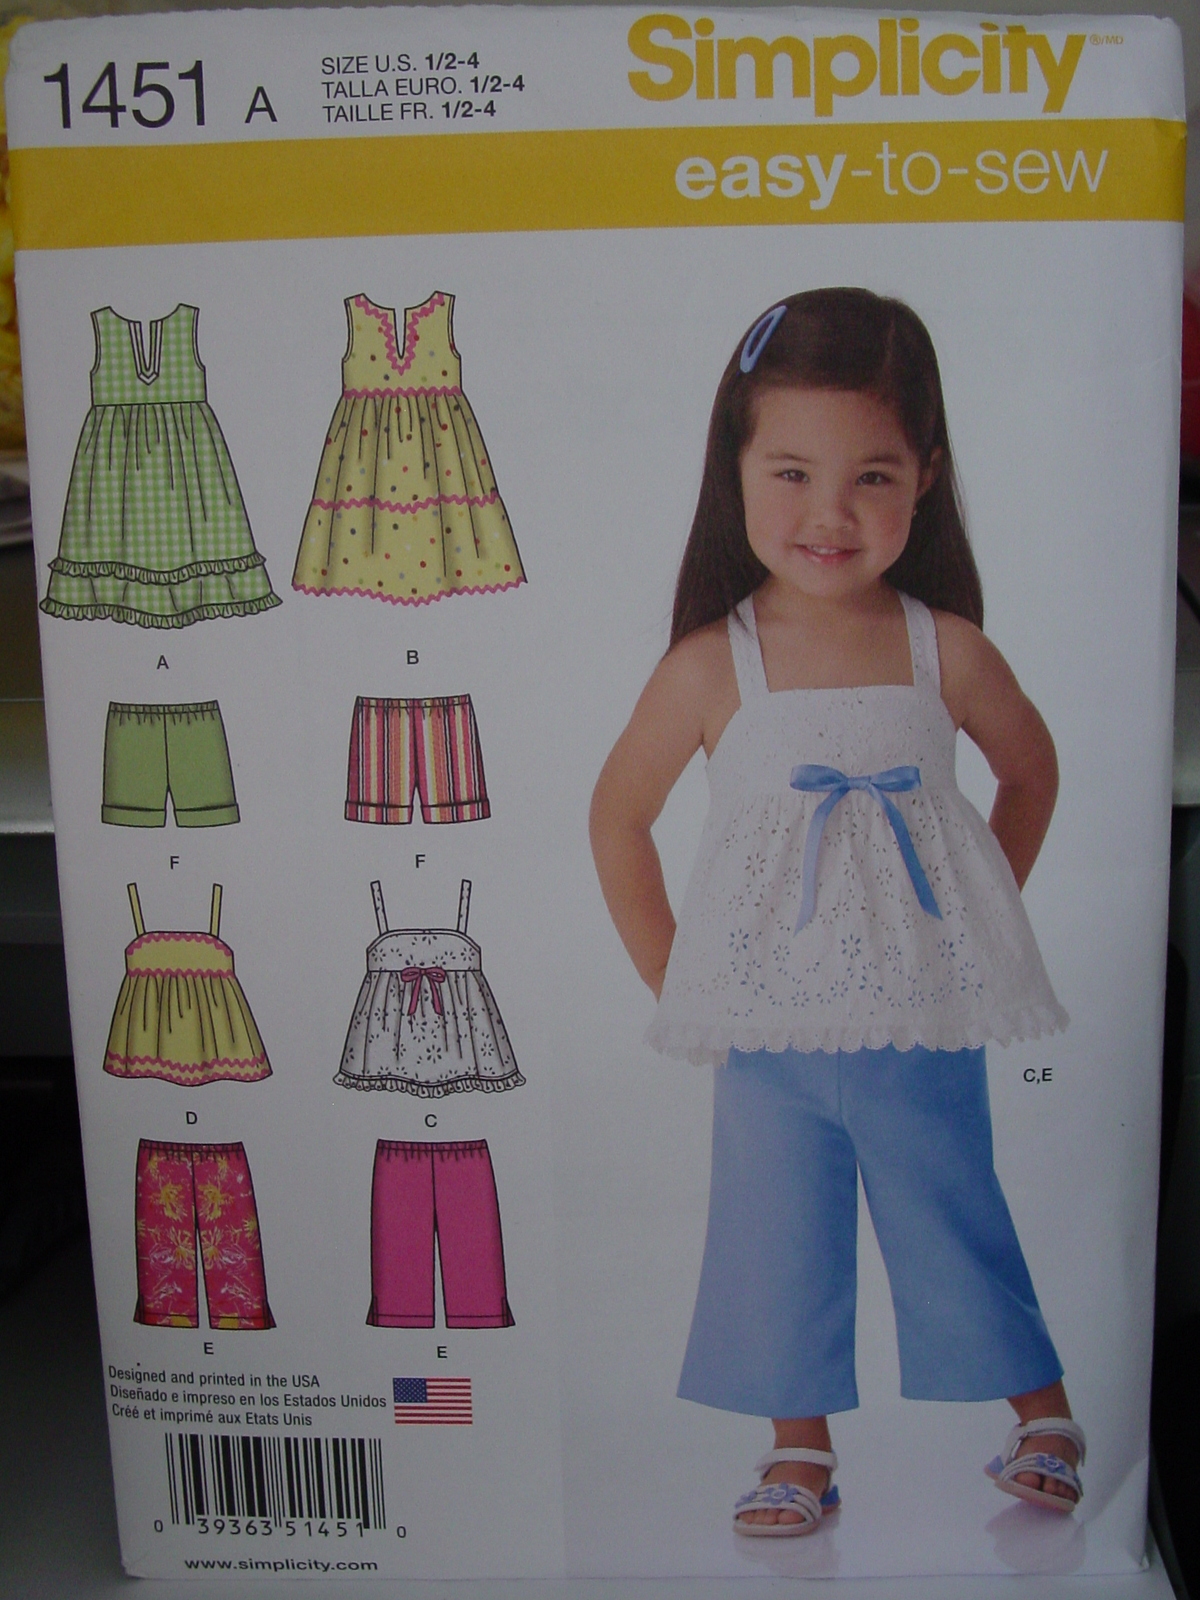 Toddler Sewing Pattern Tops & Bottoms Sizes 1/2-4 UNCUT - $4.99